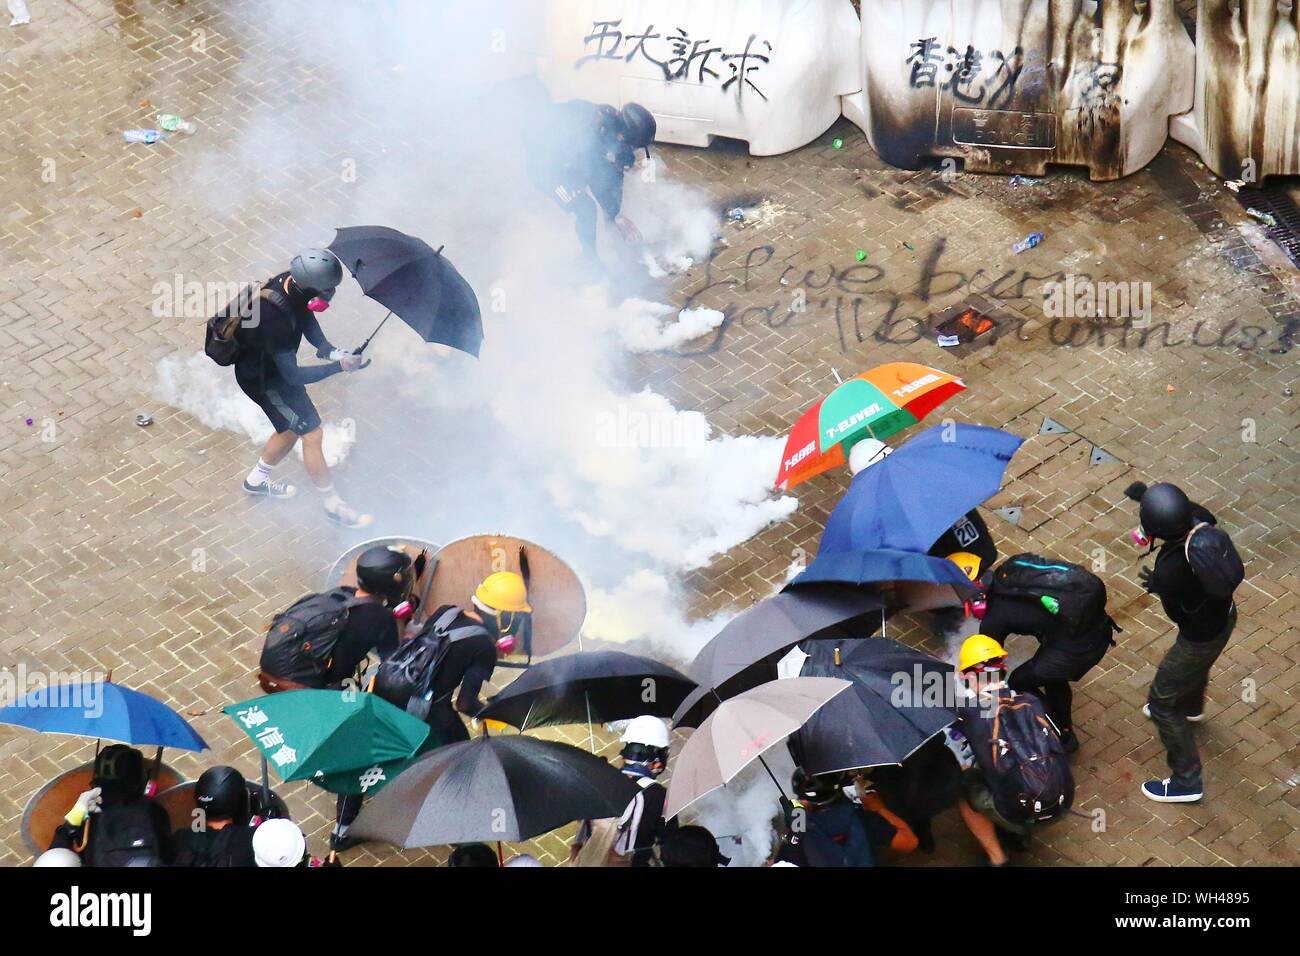 Hong Kong, China. 31st, August 2019. Riots escalates in different districts after the unauthorized peaceful rally. Here the protesters throw petrol bombs at the Central Government Office at Admiralty and the Police deploy tear gas. Stock Photo